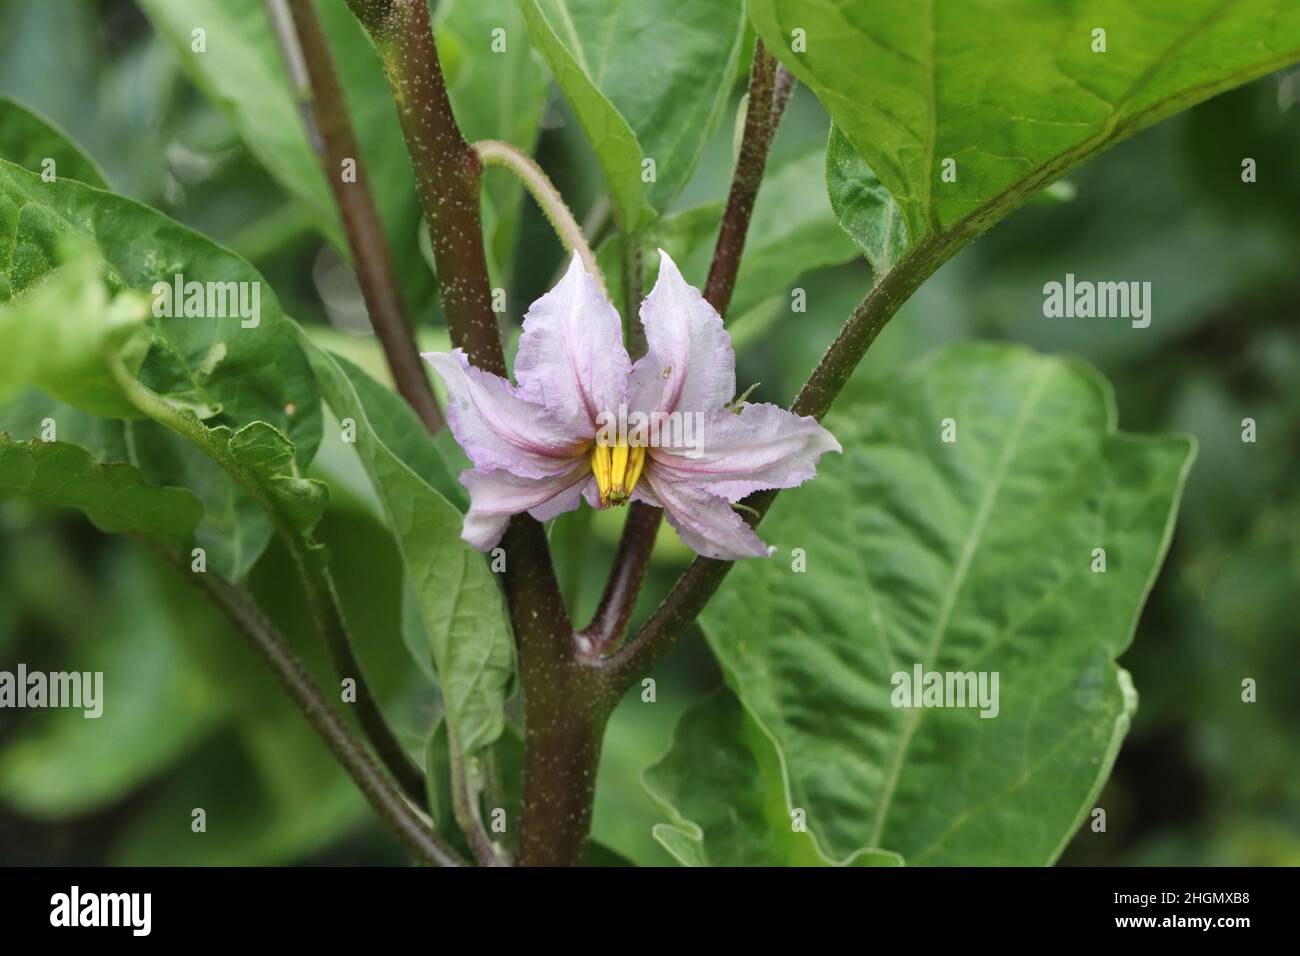 Flowers of the eggplant in the garden. Stock Photo